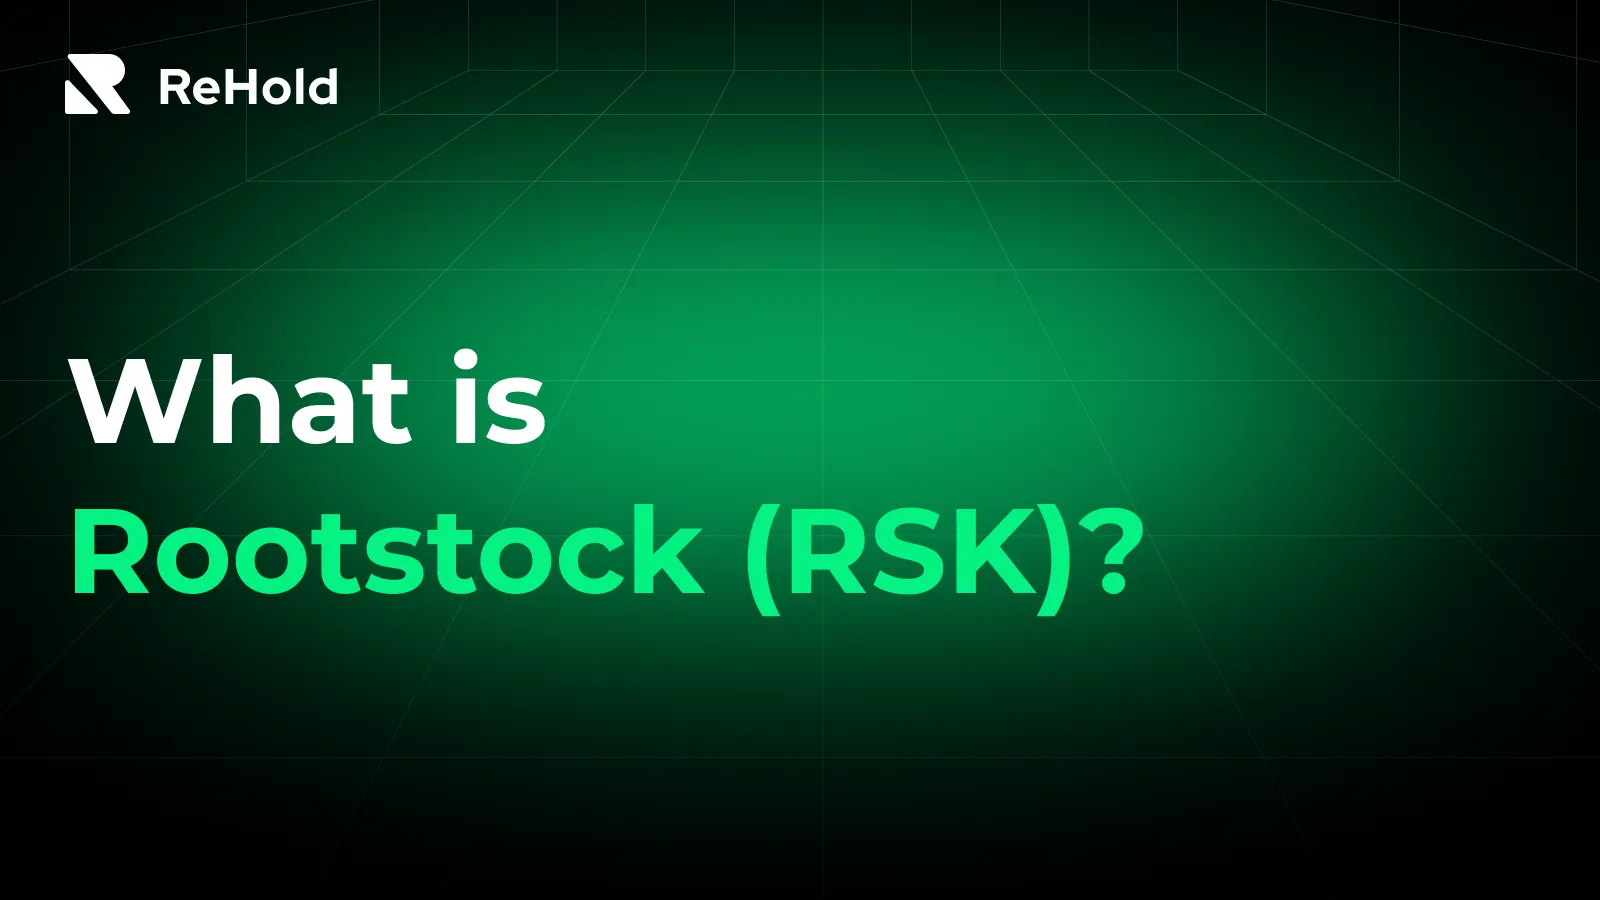 What is Rootstock (RSK)